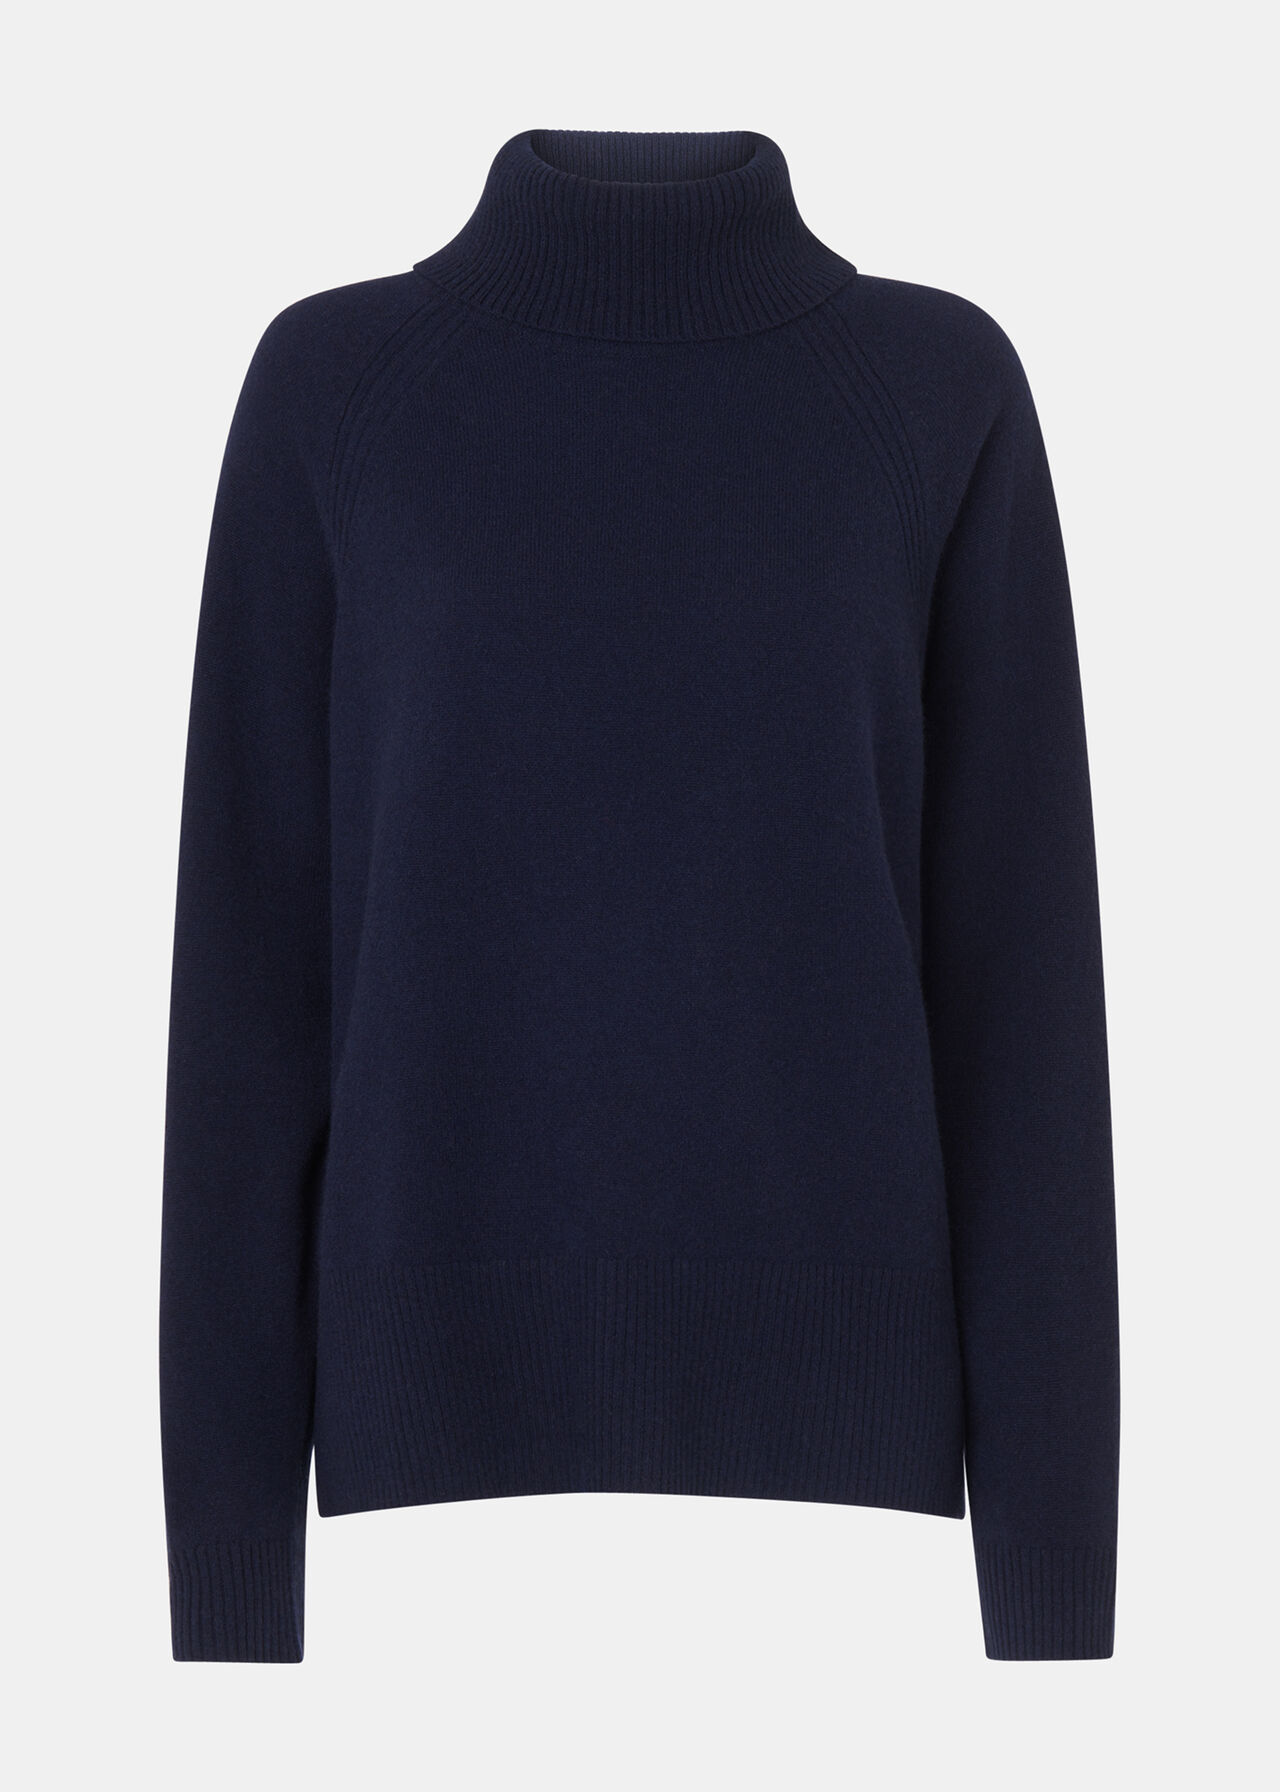 Navy Cashmere Roll Neck Jumper | Whistles